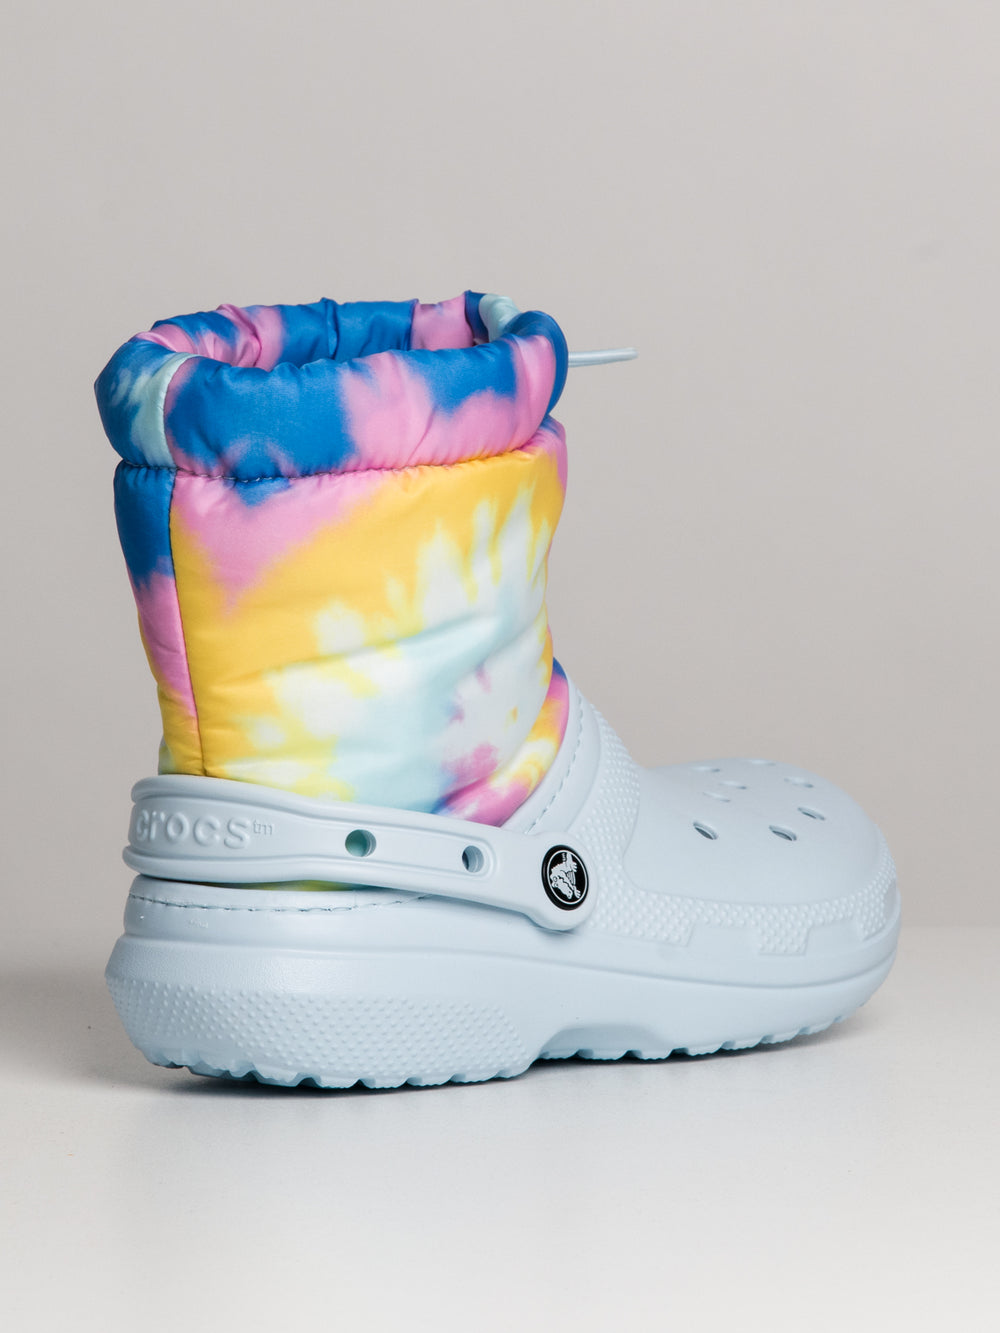 WOMENS CROCS CLASSIC LINED NEO PUFF TIE DYE BOOT - CLEARANCE